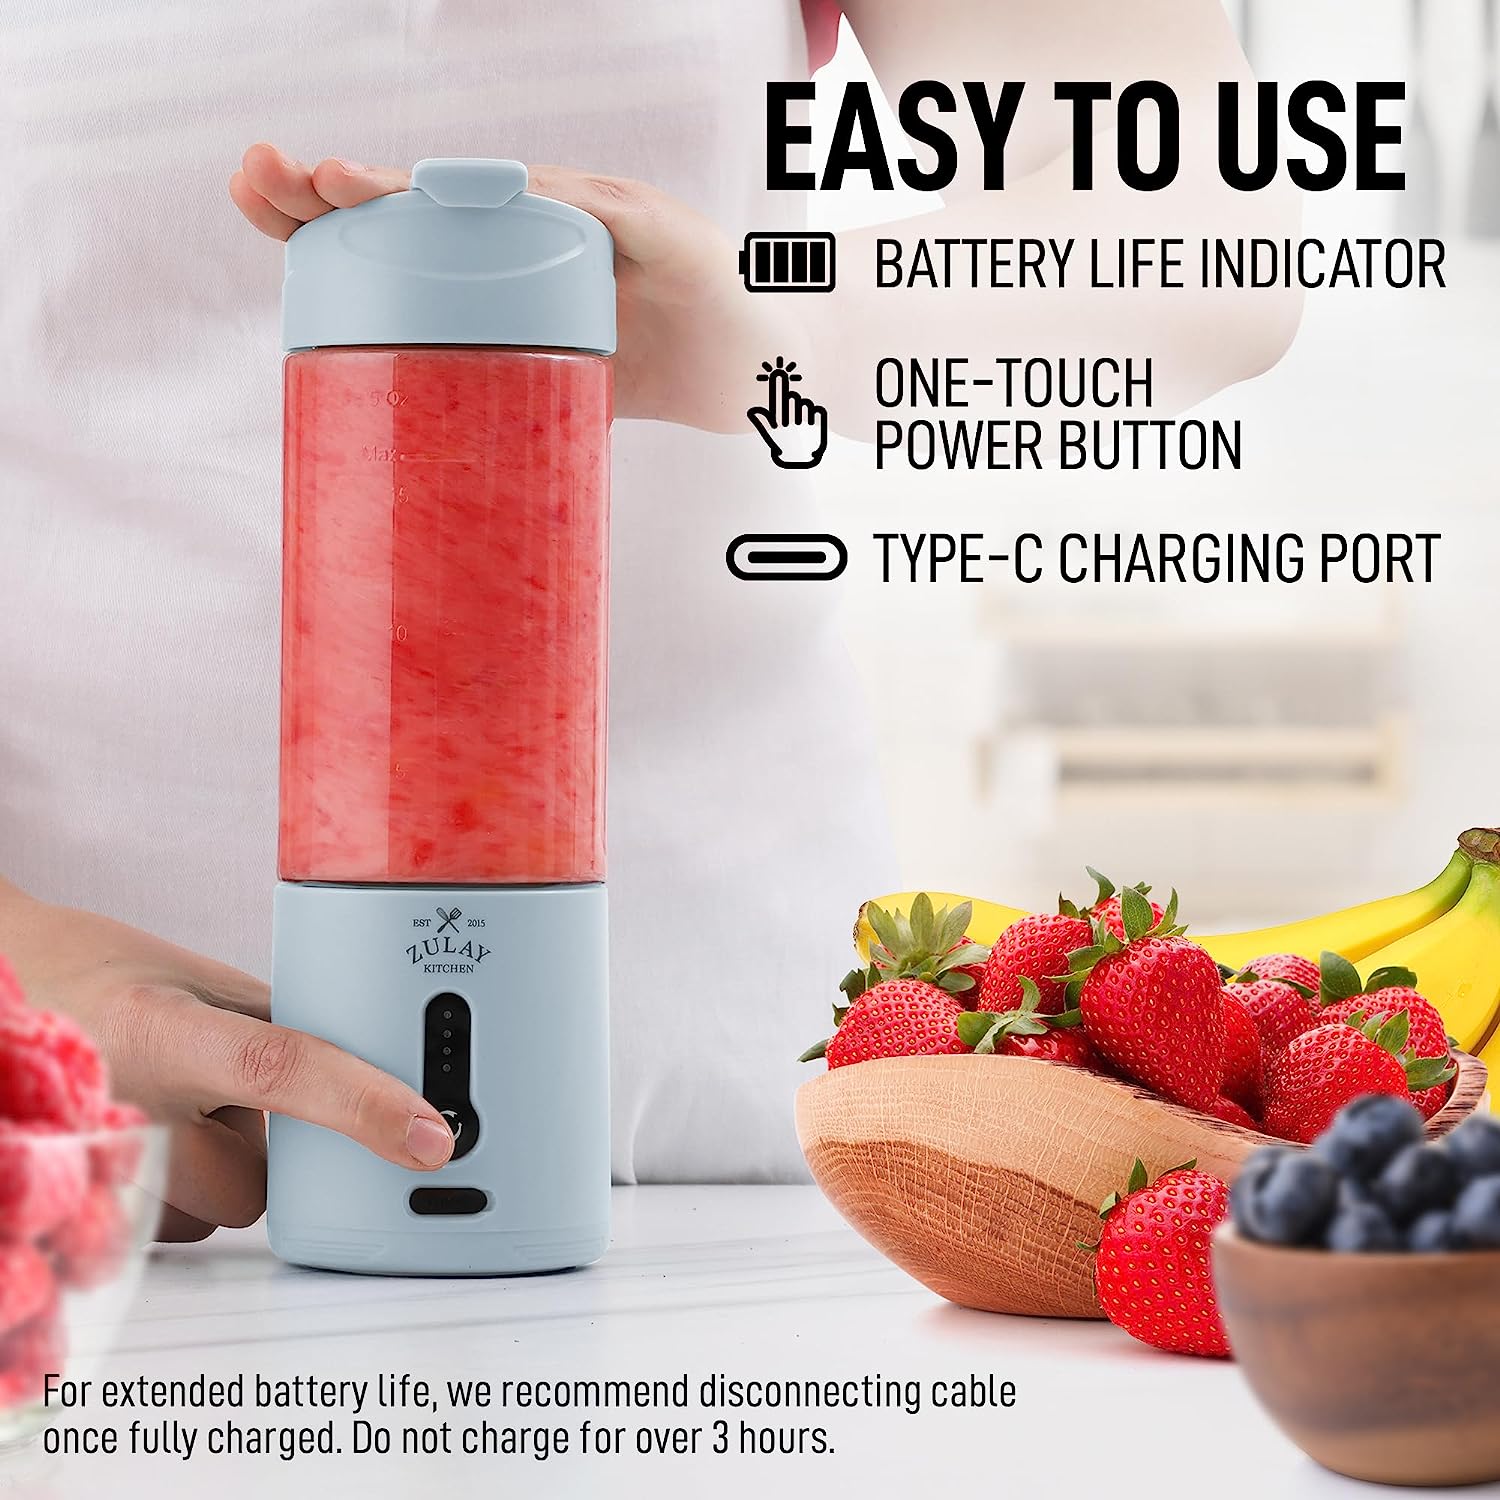 Portable Blender Personal Blender for Shakes and Smoothies Mini Blender Cup  SALE